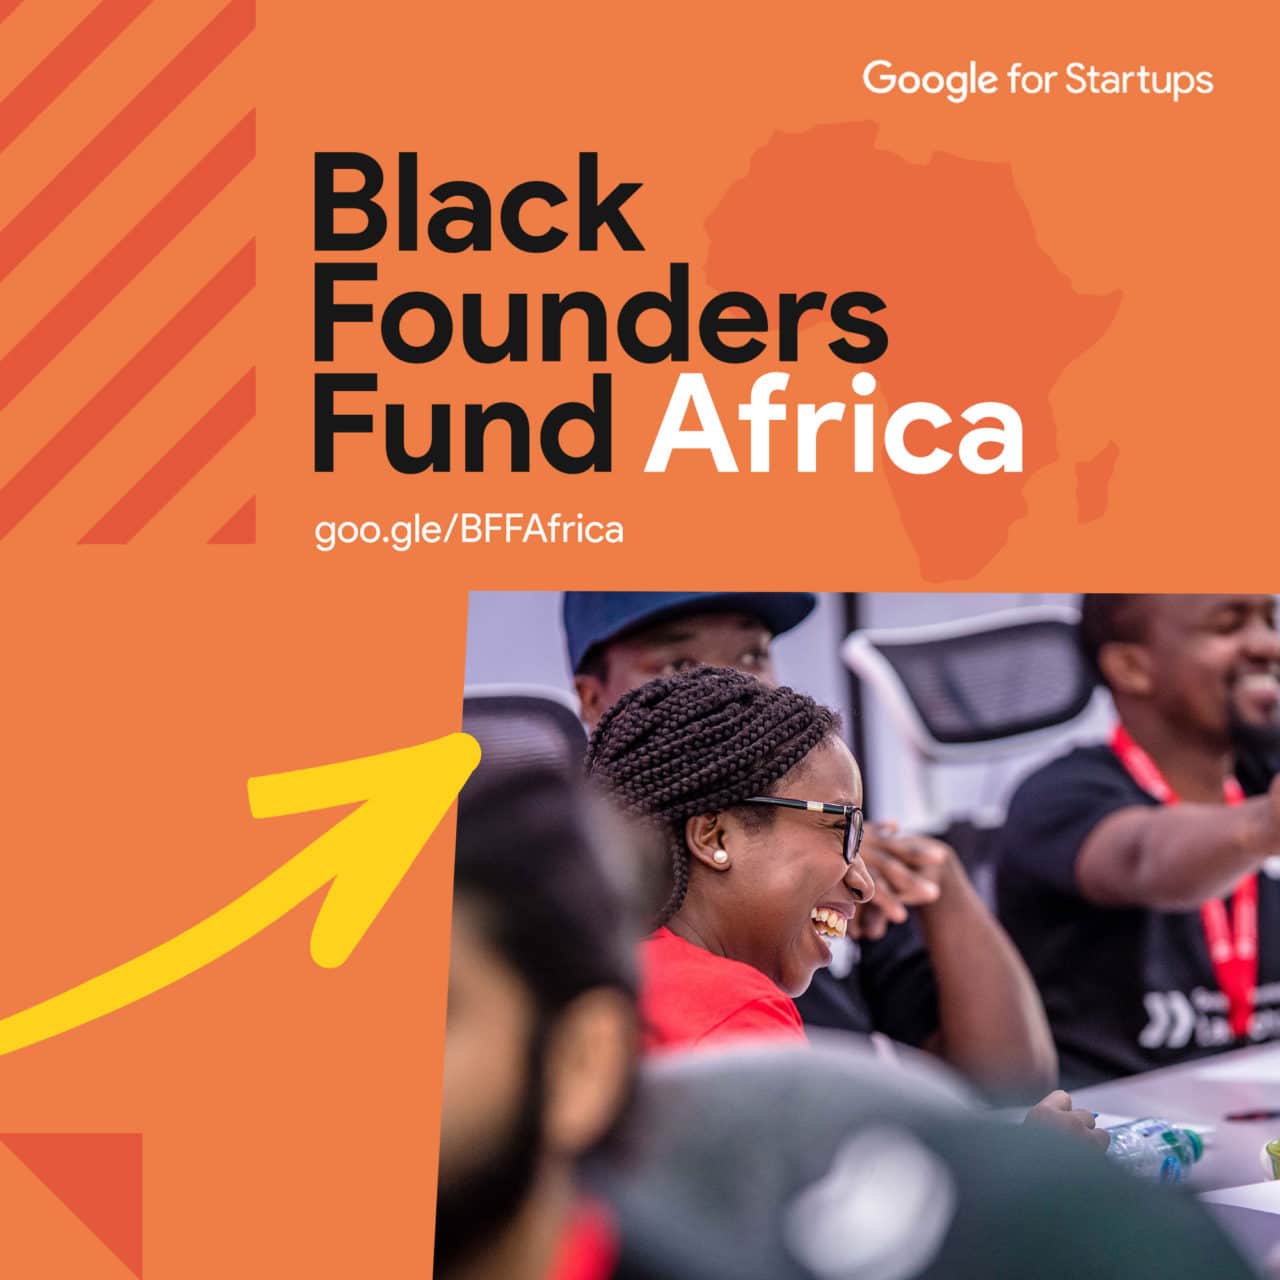 Google Black Founders Fund Africa 2021 for African Startups